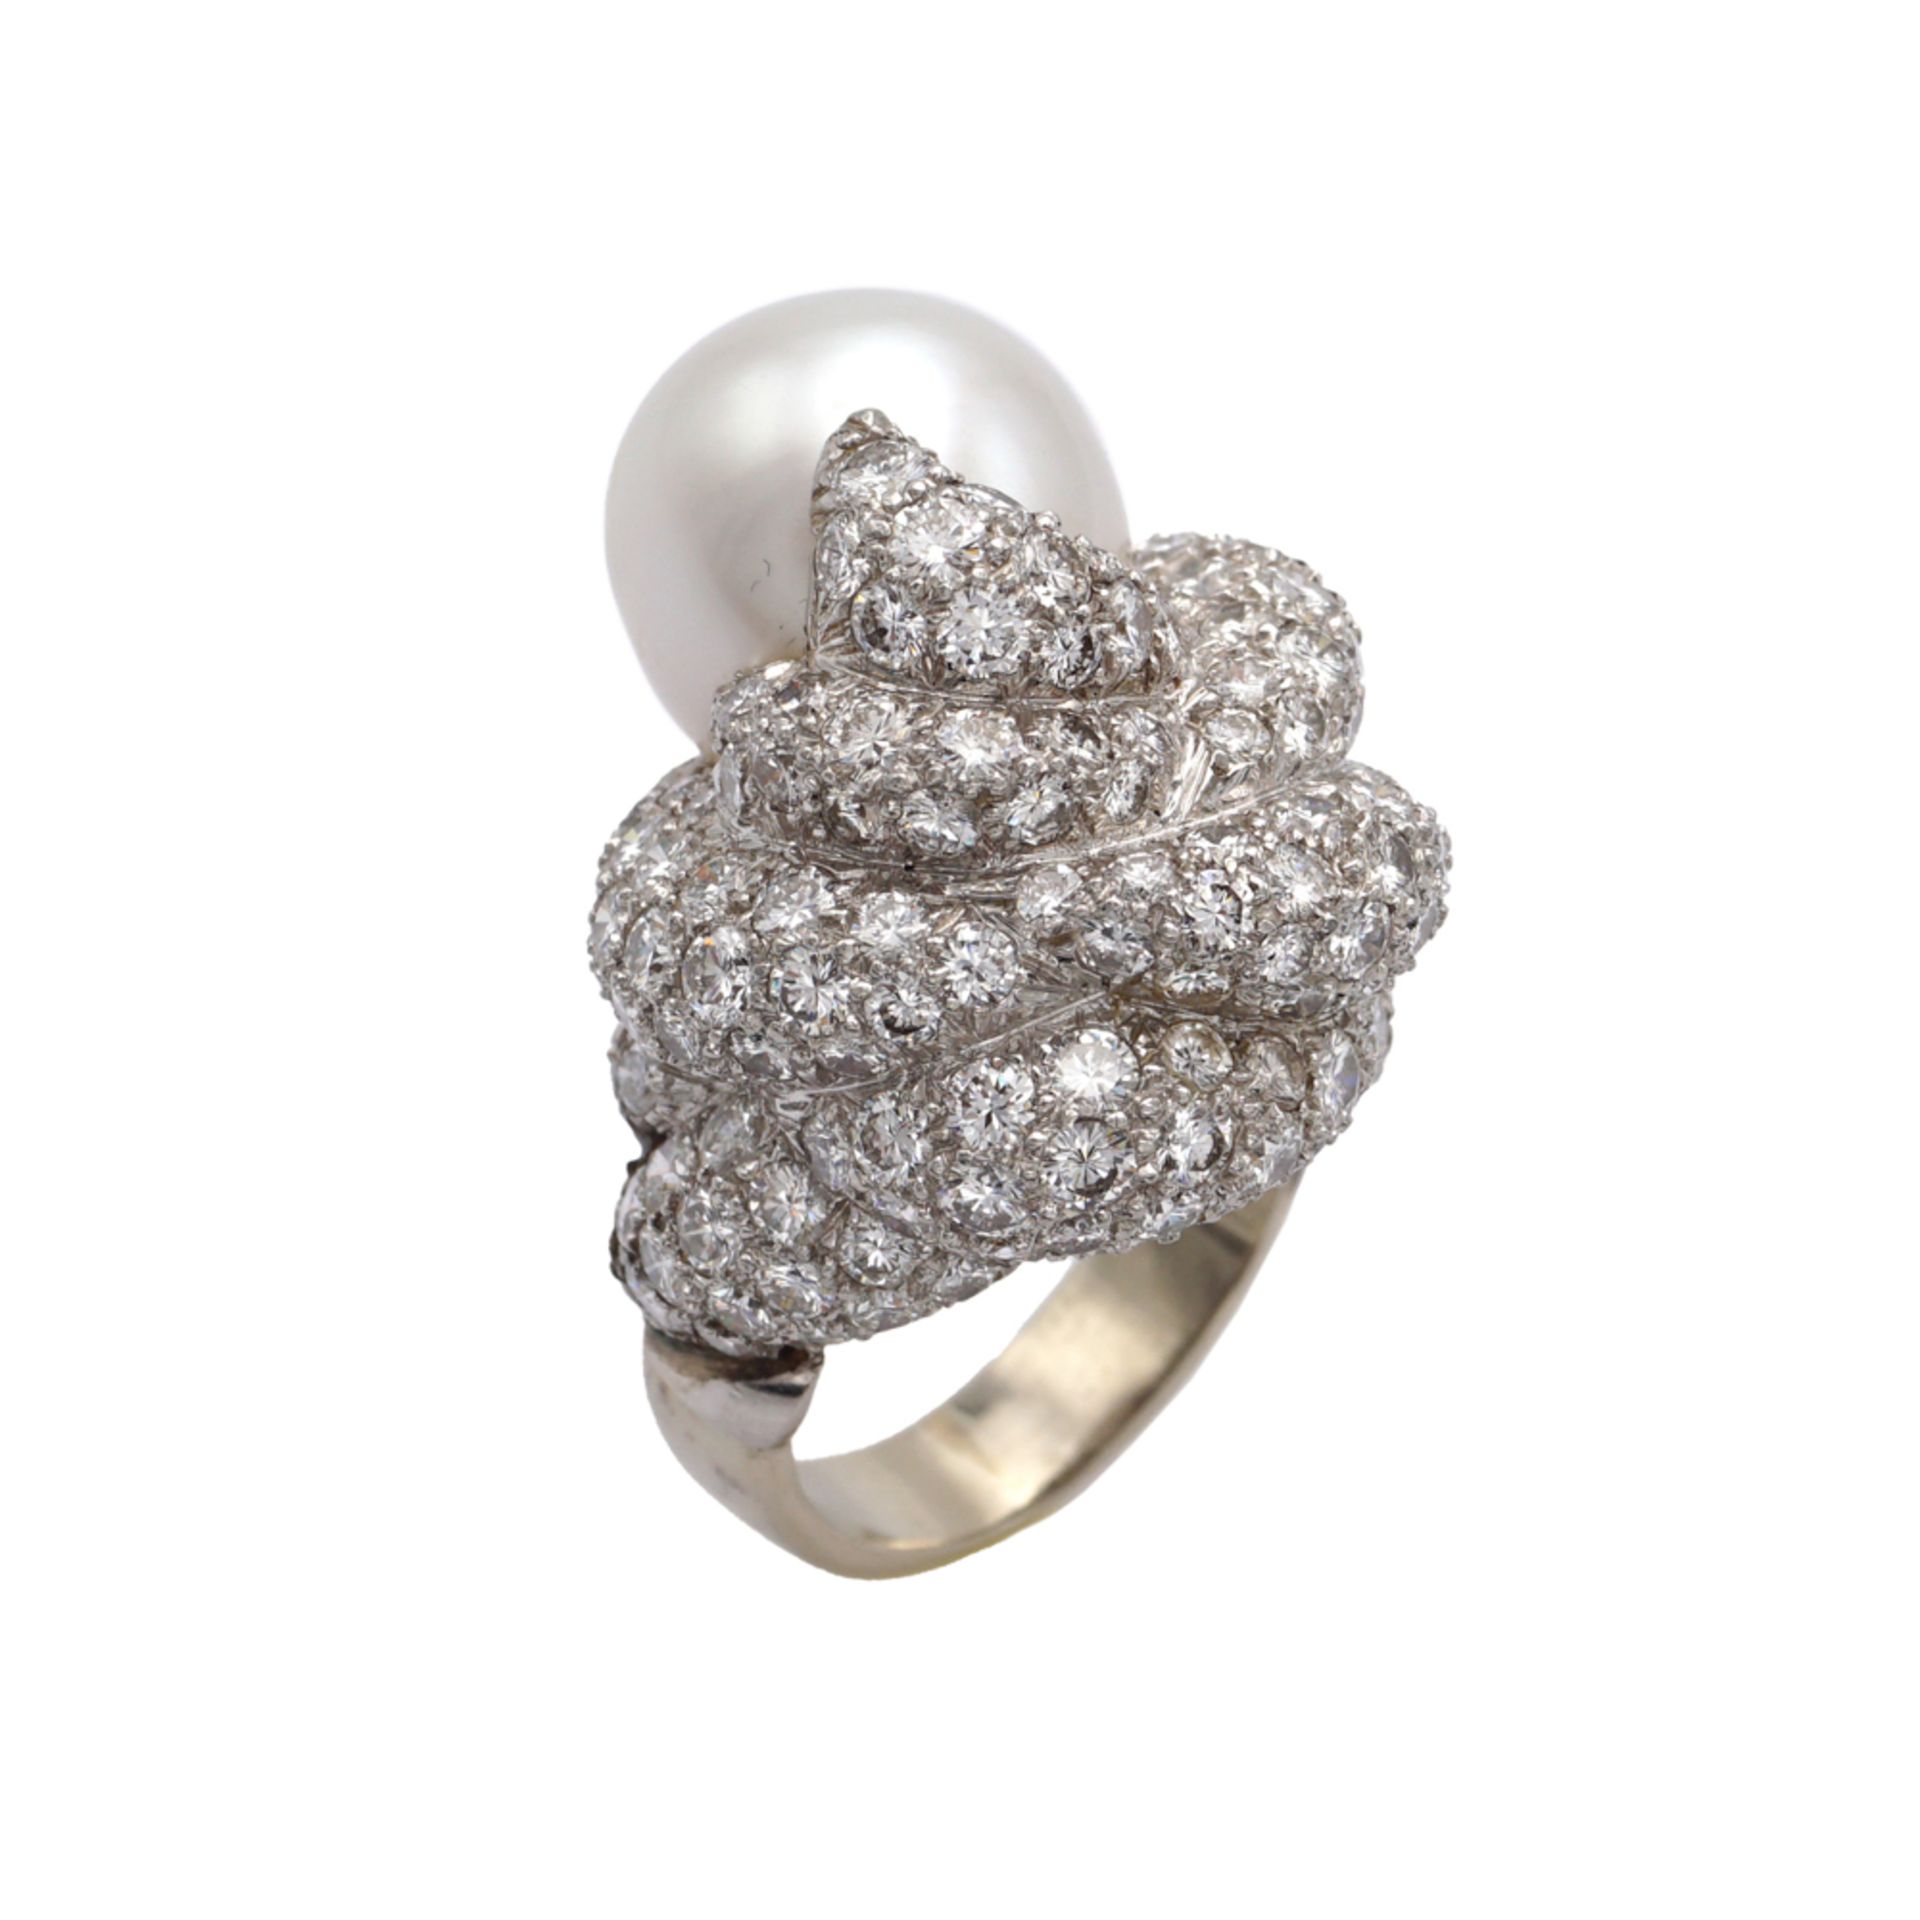 18kt white gold with South Sea pearl and diamonds Cocktail ring - Image 2 of 2